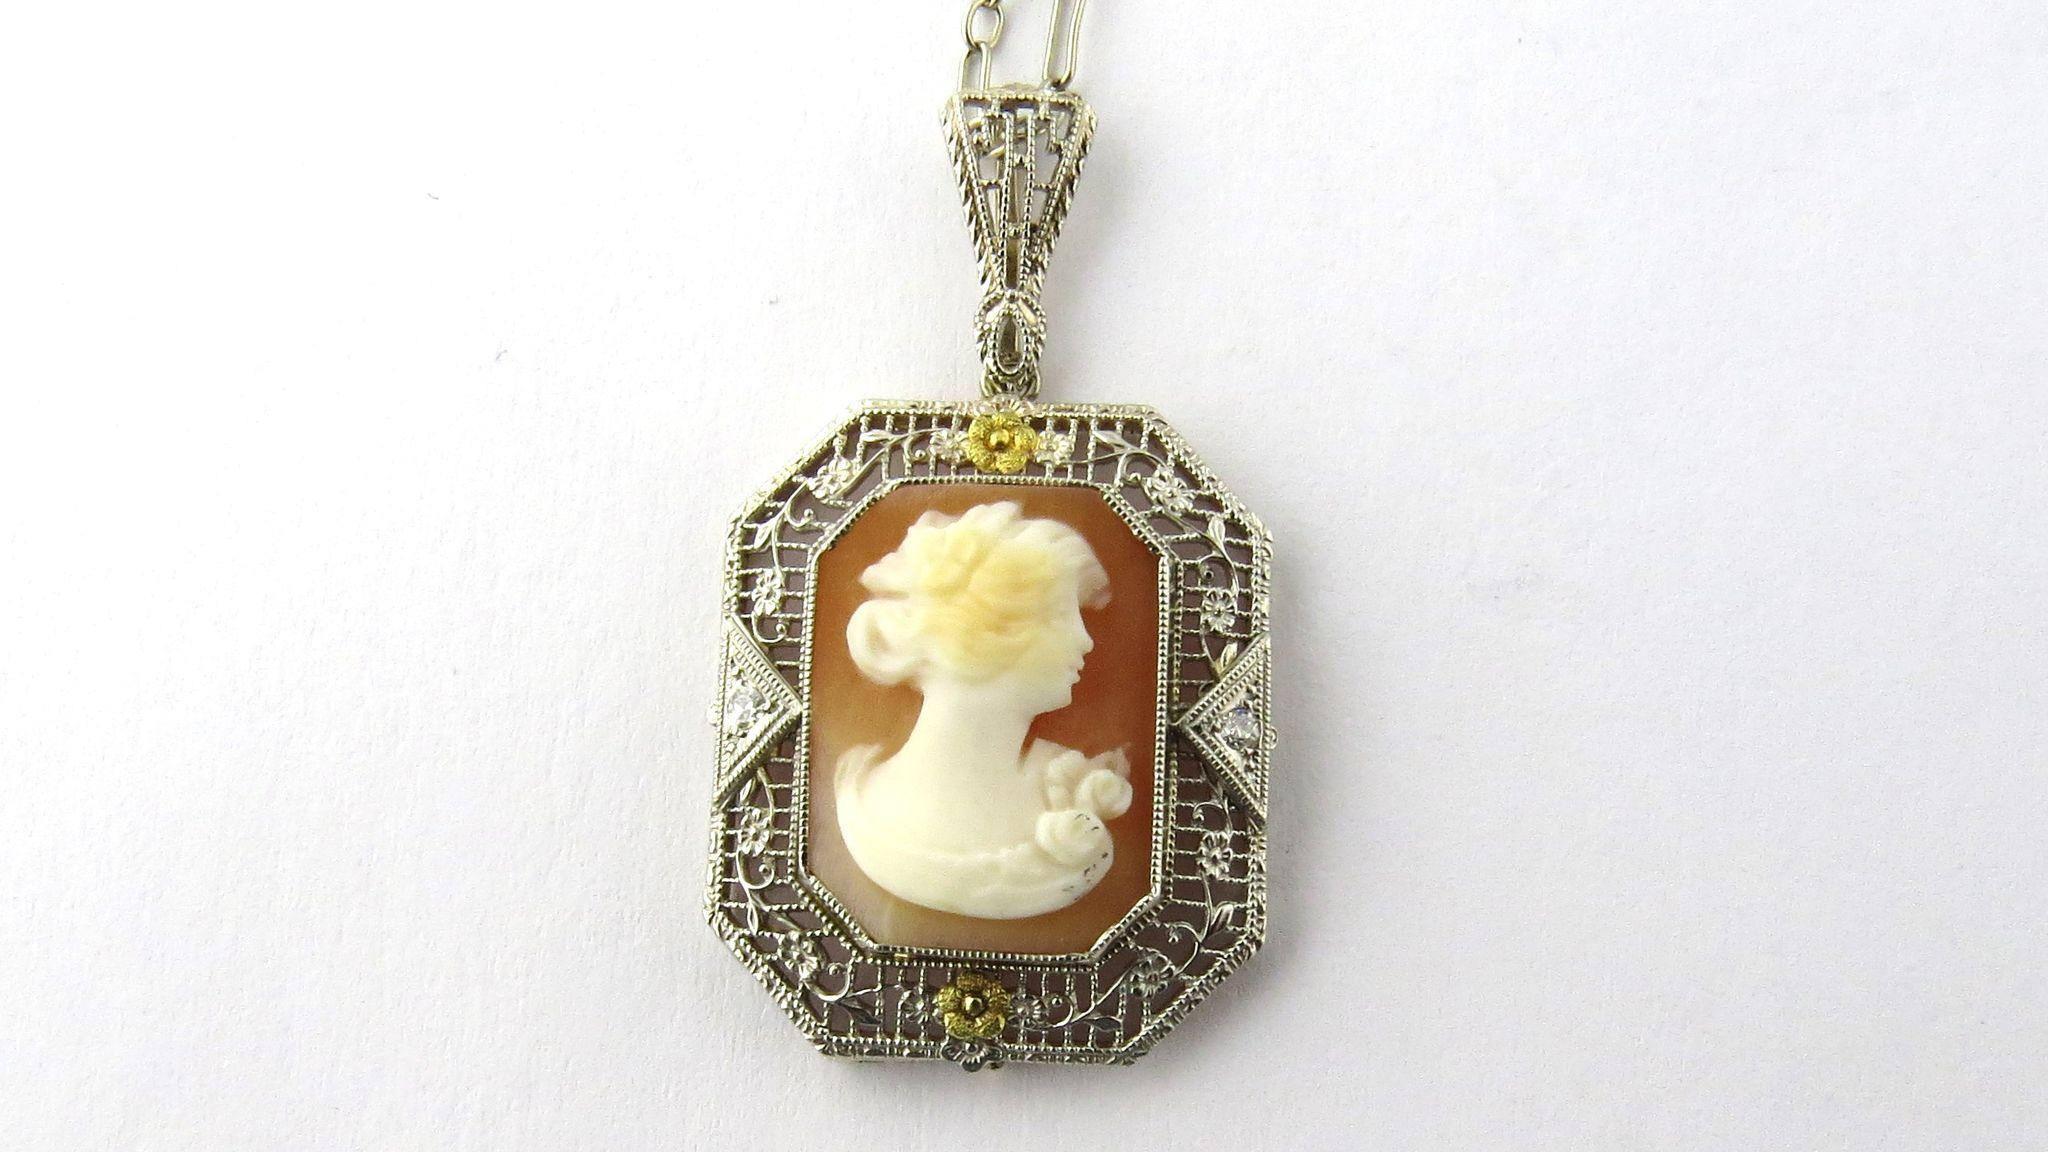 Delicate 14K white gold filigree cameo pendant with 14K yellow gold flower accents at top and bottom 

Cameo is adorned on each side with a diamond. Single cut at .03ct each. Color H-I Clarity SI(1). 

Marked: 14K on bale. Weighs 5.3 g, 3.45 dwt.